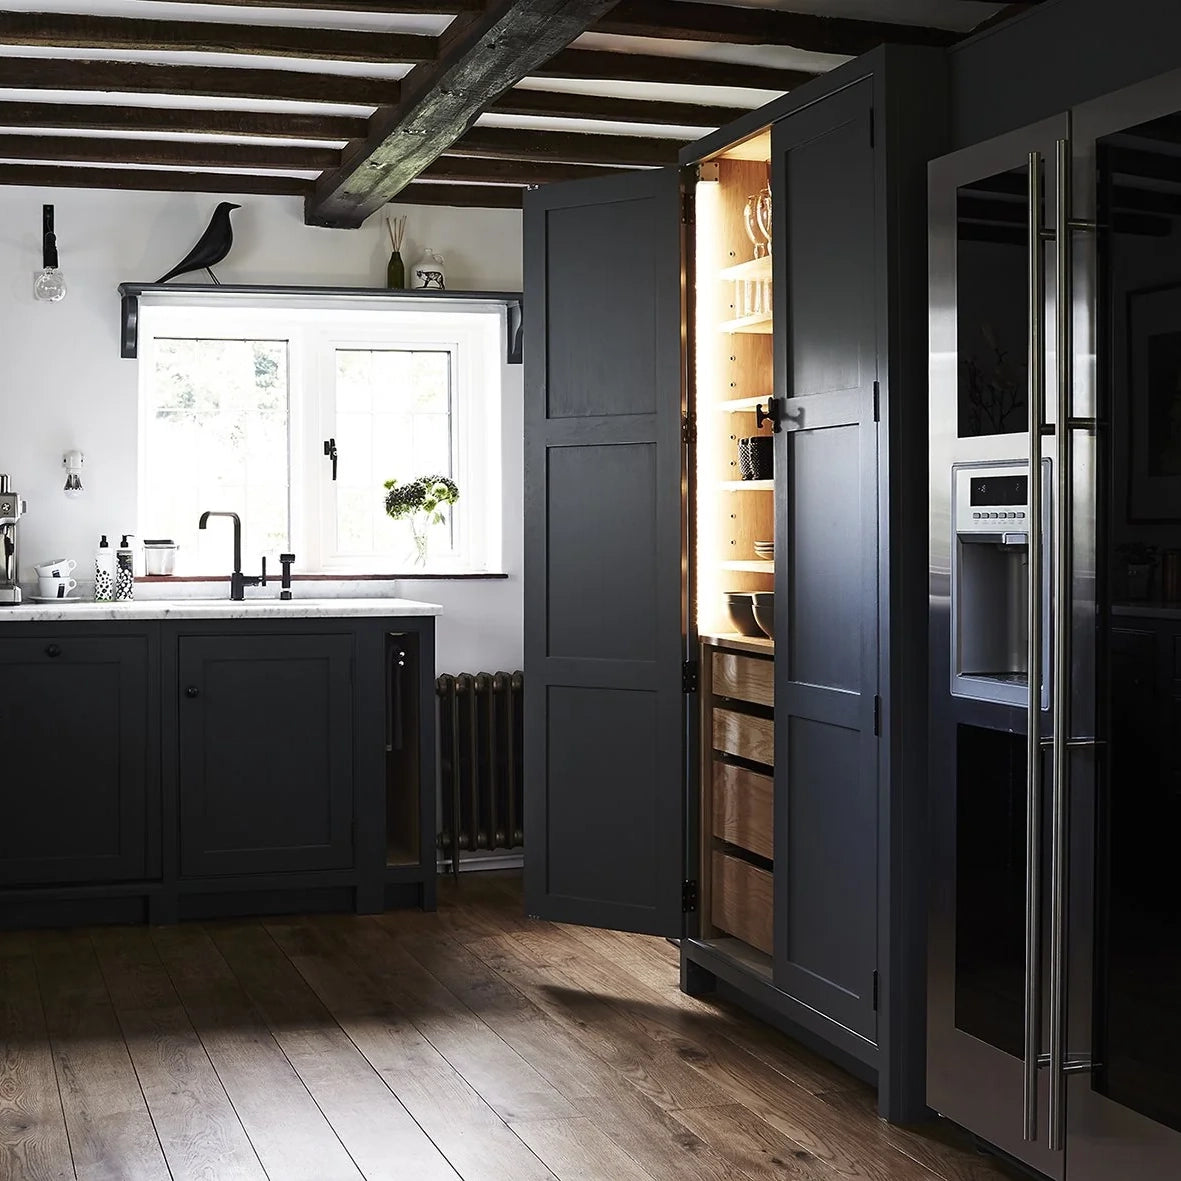 A CULINARY JOURNEY THROUGH TIME: THE EVOLUTION OF THE ENGLISH KITCHEN